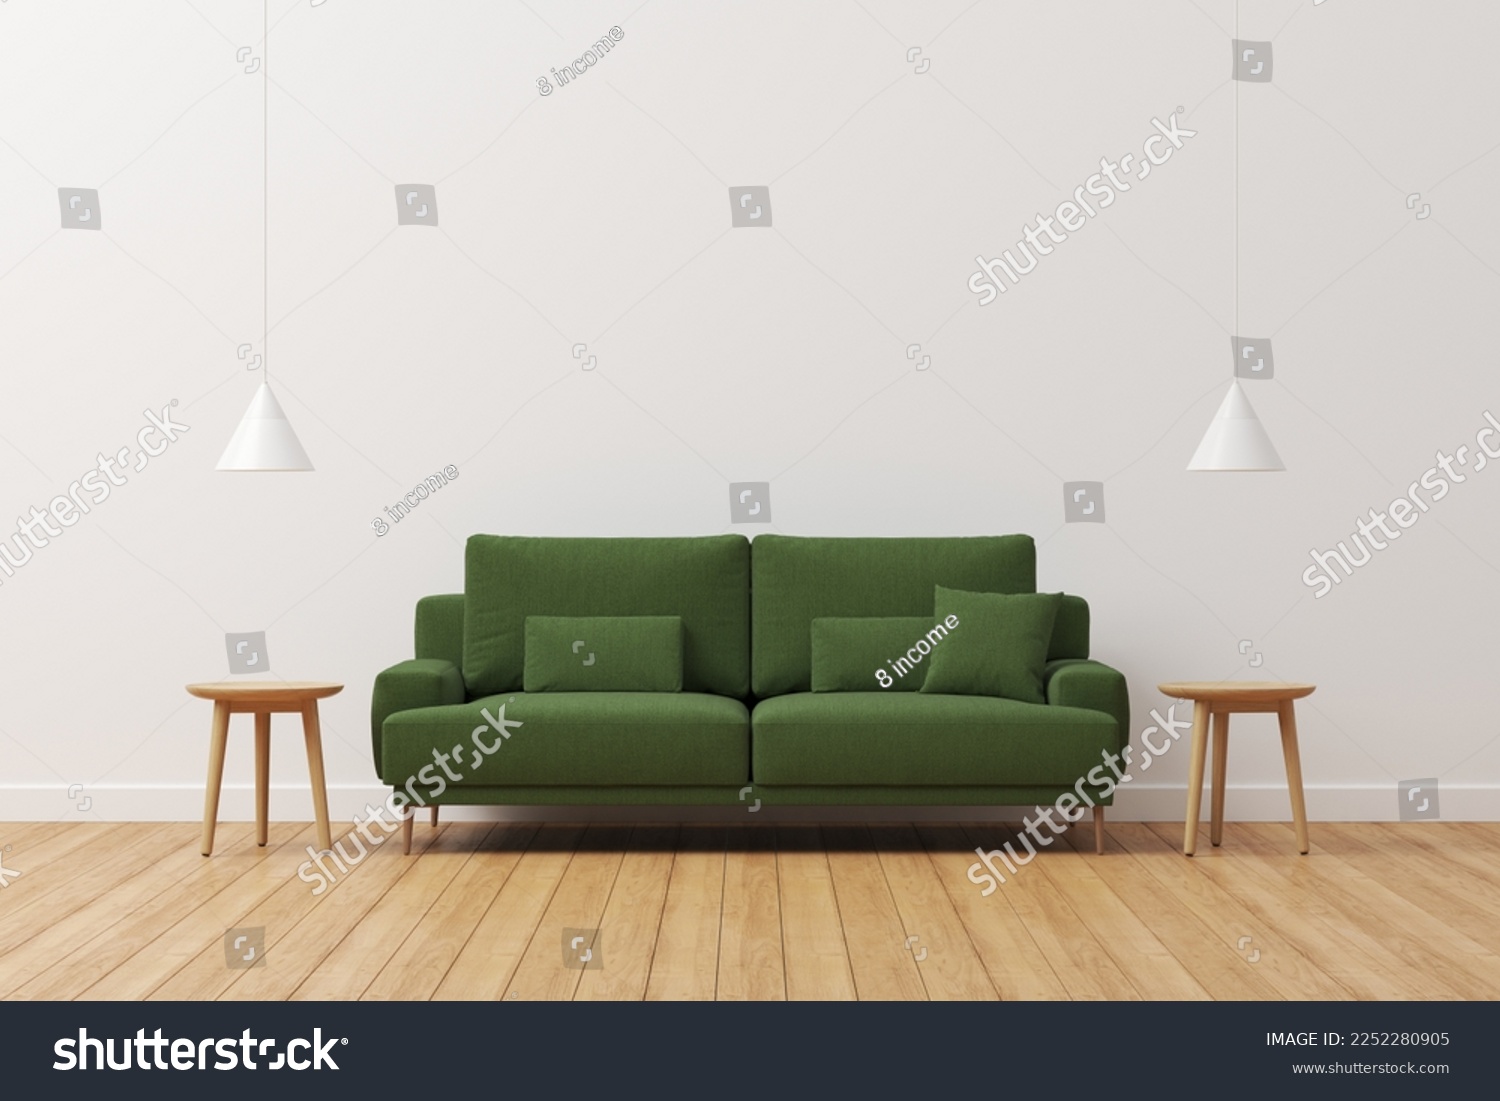 Cozy living area scene. Interior of living minimal style with empty space for products presentation or text for advertising. #2252280905